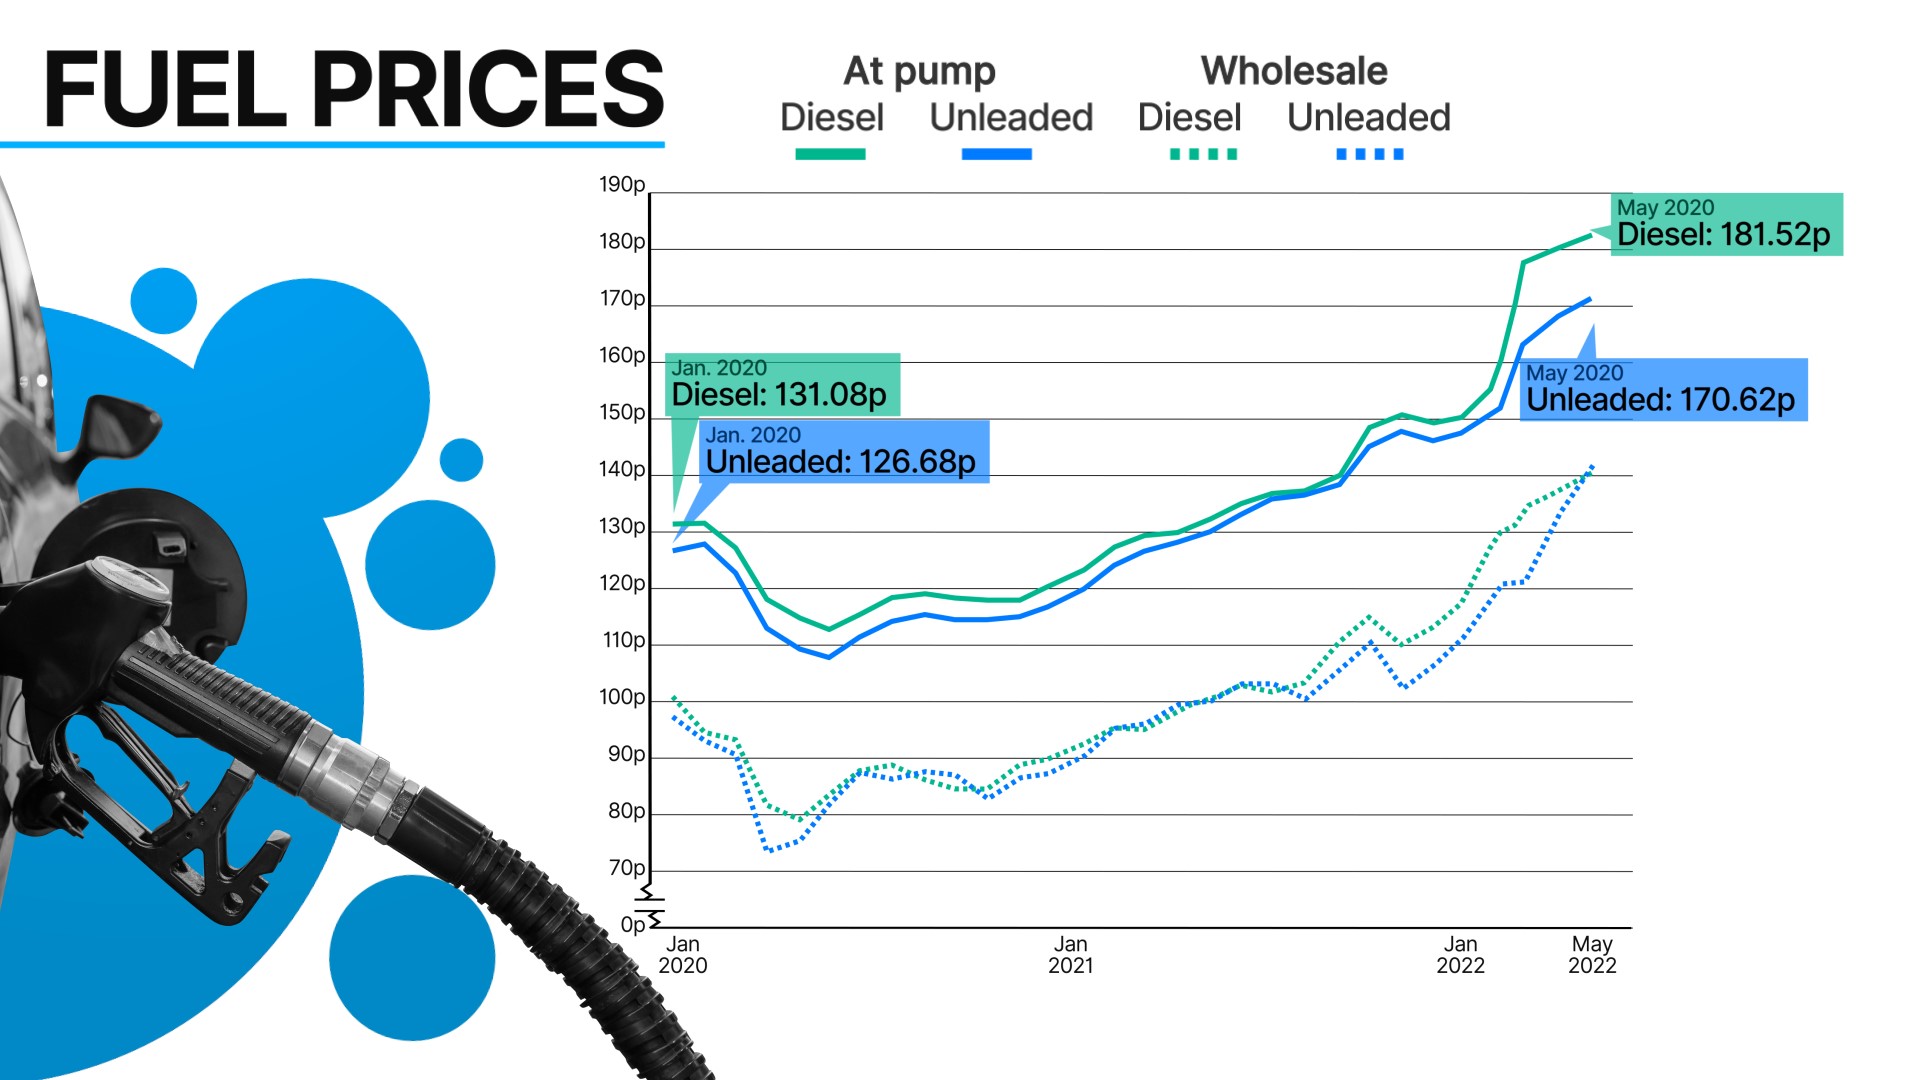 Rising: The cost of fuel has steadily increased since 2020.